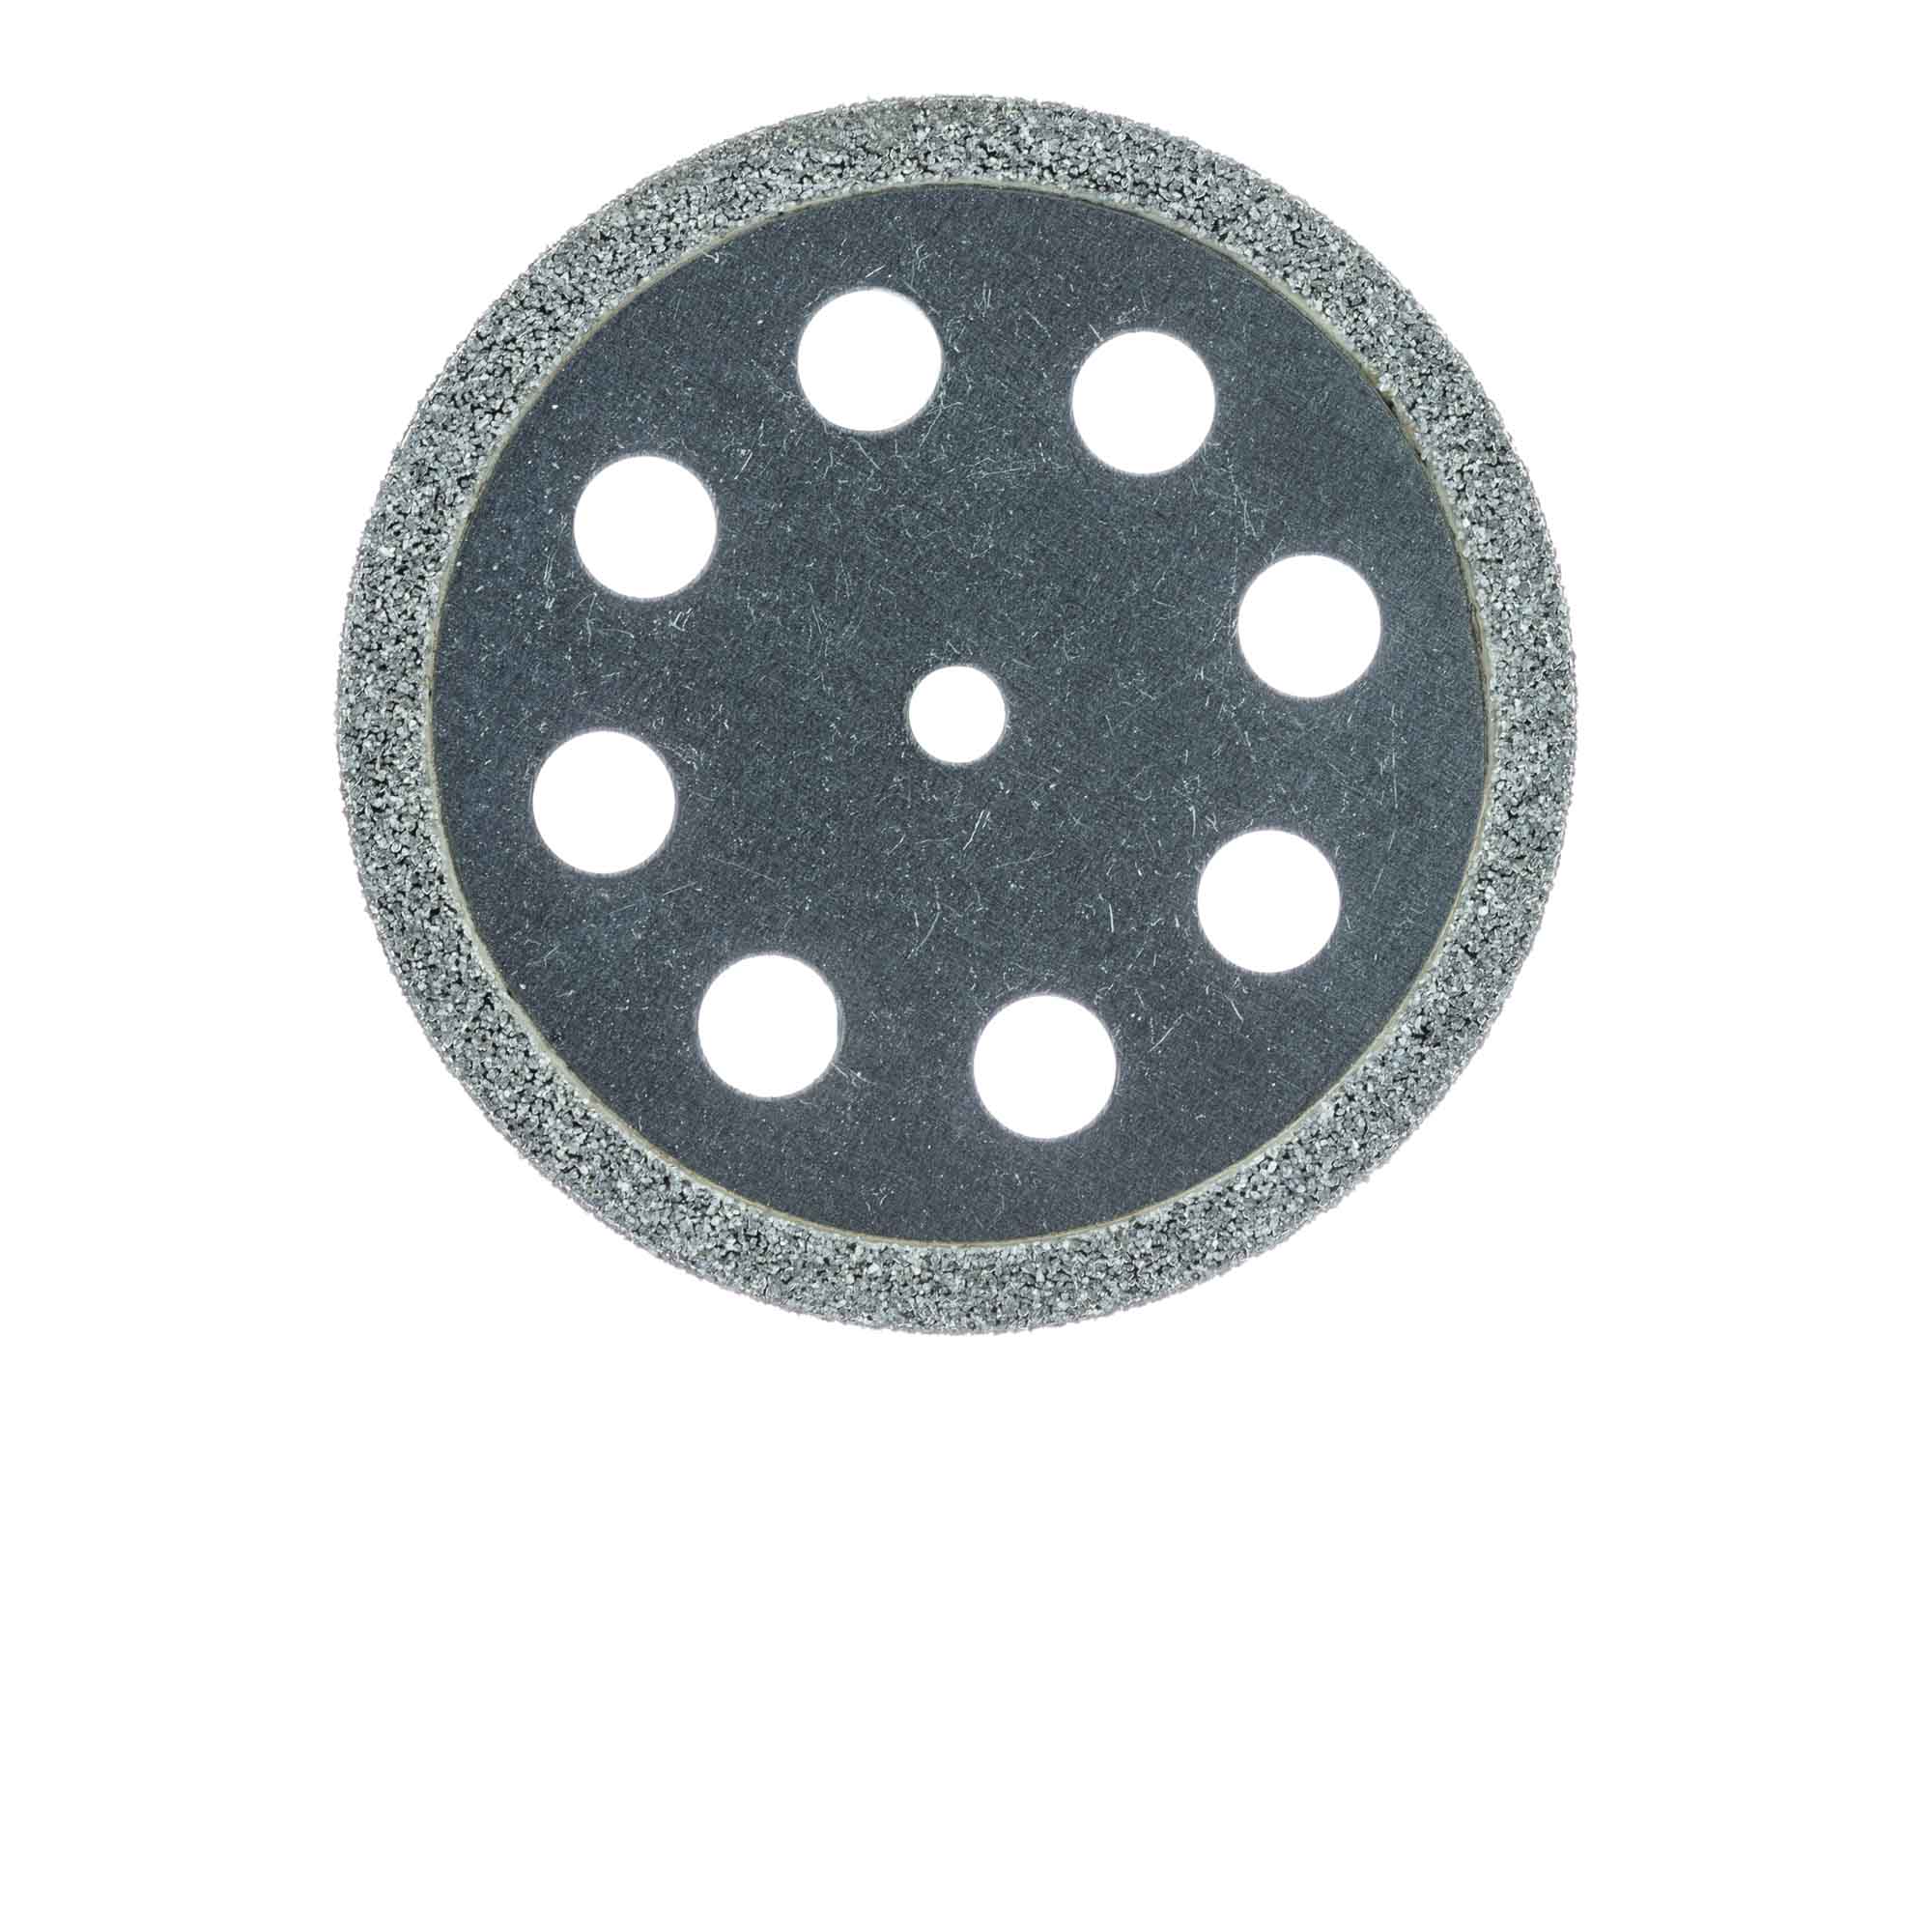 911D-220-UNM Diamond Bur, Perforated Disc, Double Sided, 0.5mm thick, 22mm Diameter, UNM